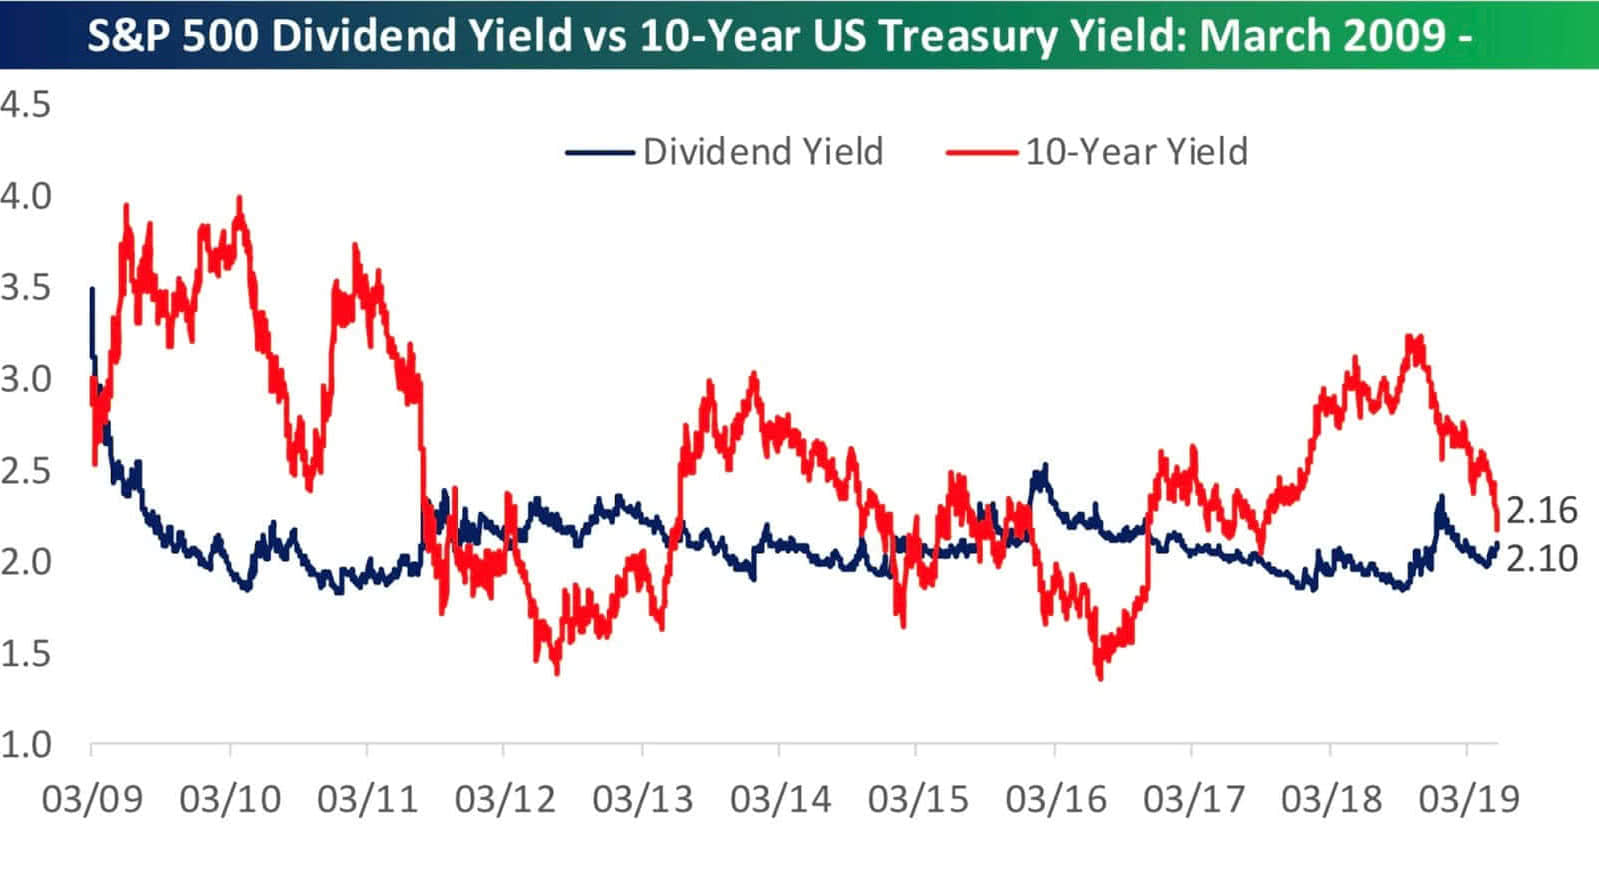 S&P 500 Dividend yield vs 10-year treasury yield since 2009